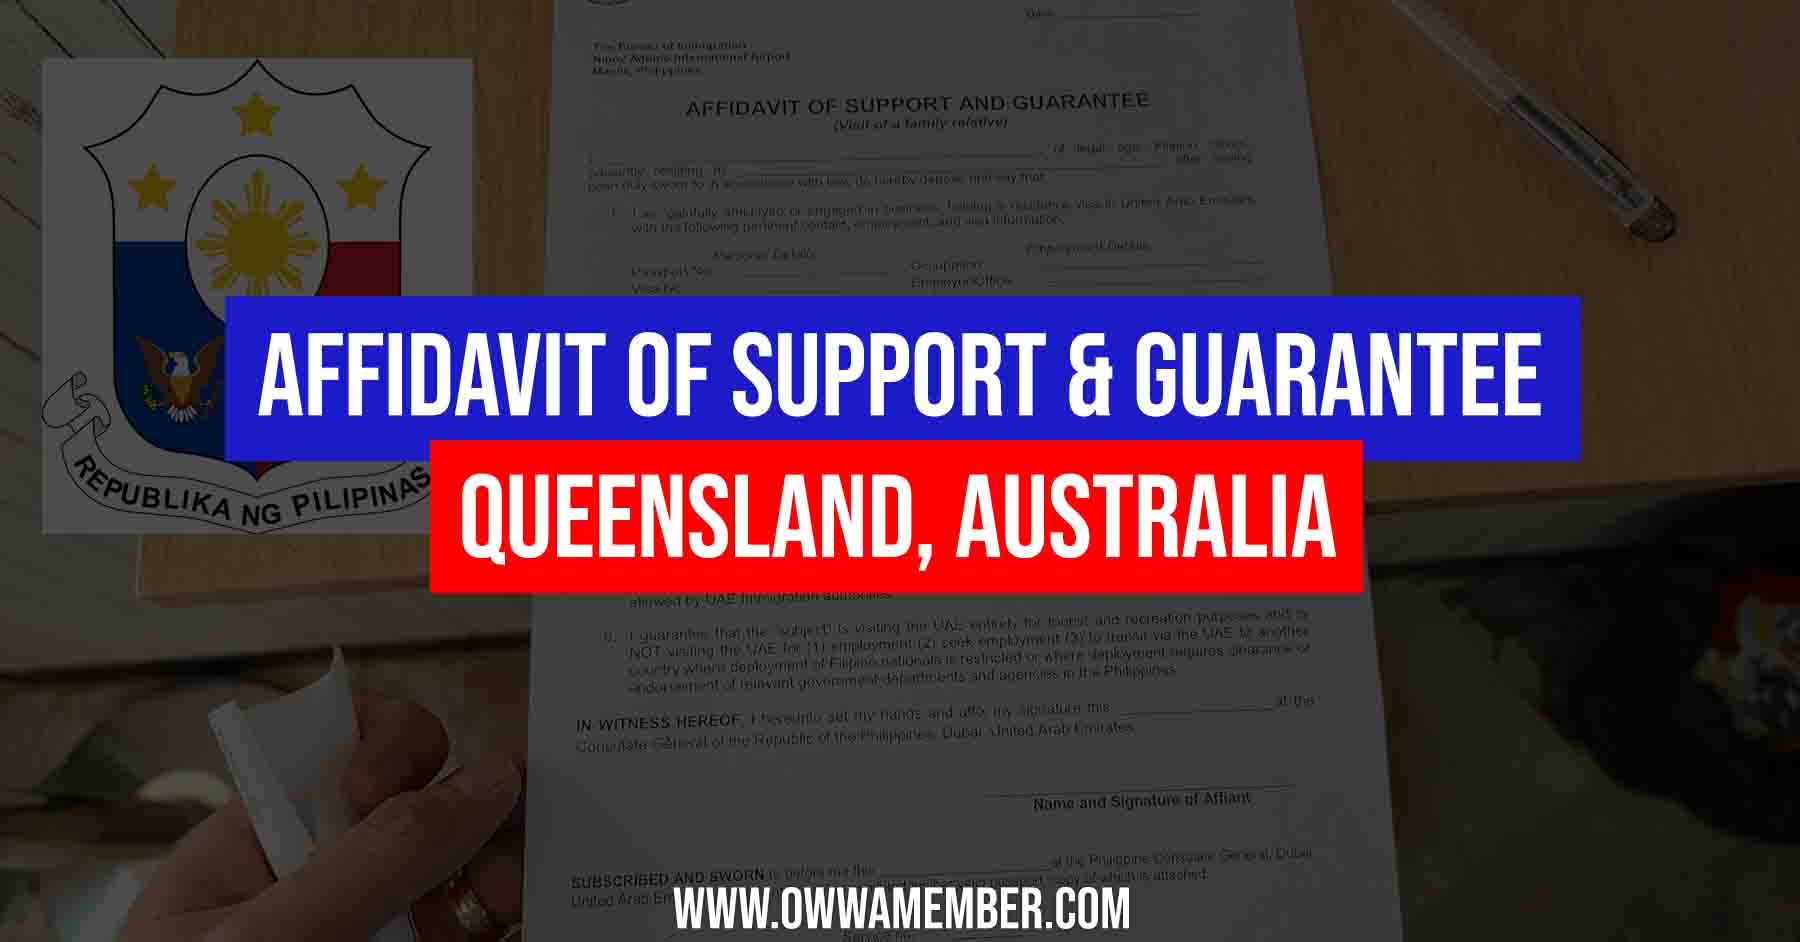 affidavit of support guarantee in queensland application for filipinos